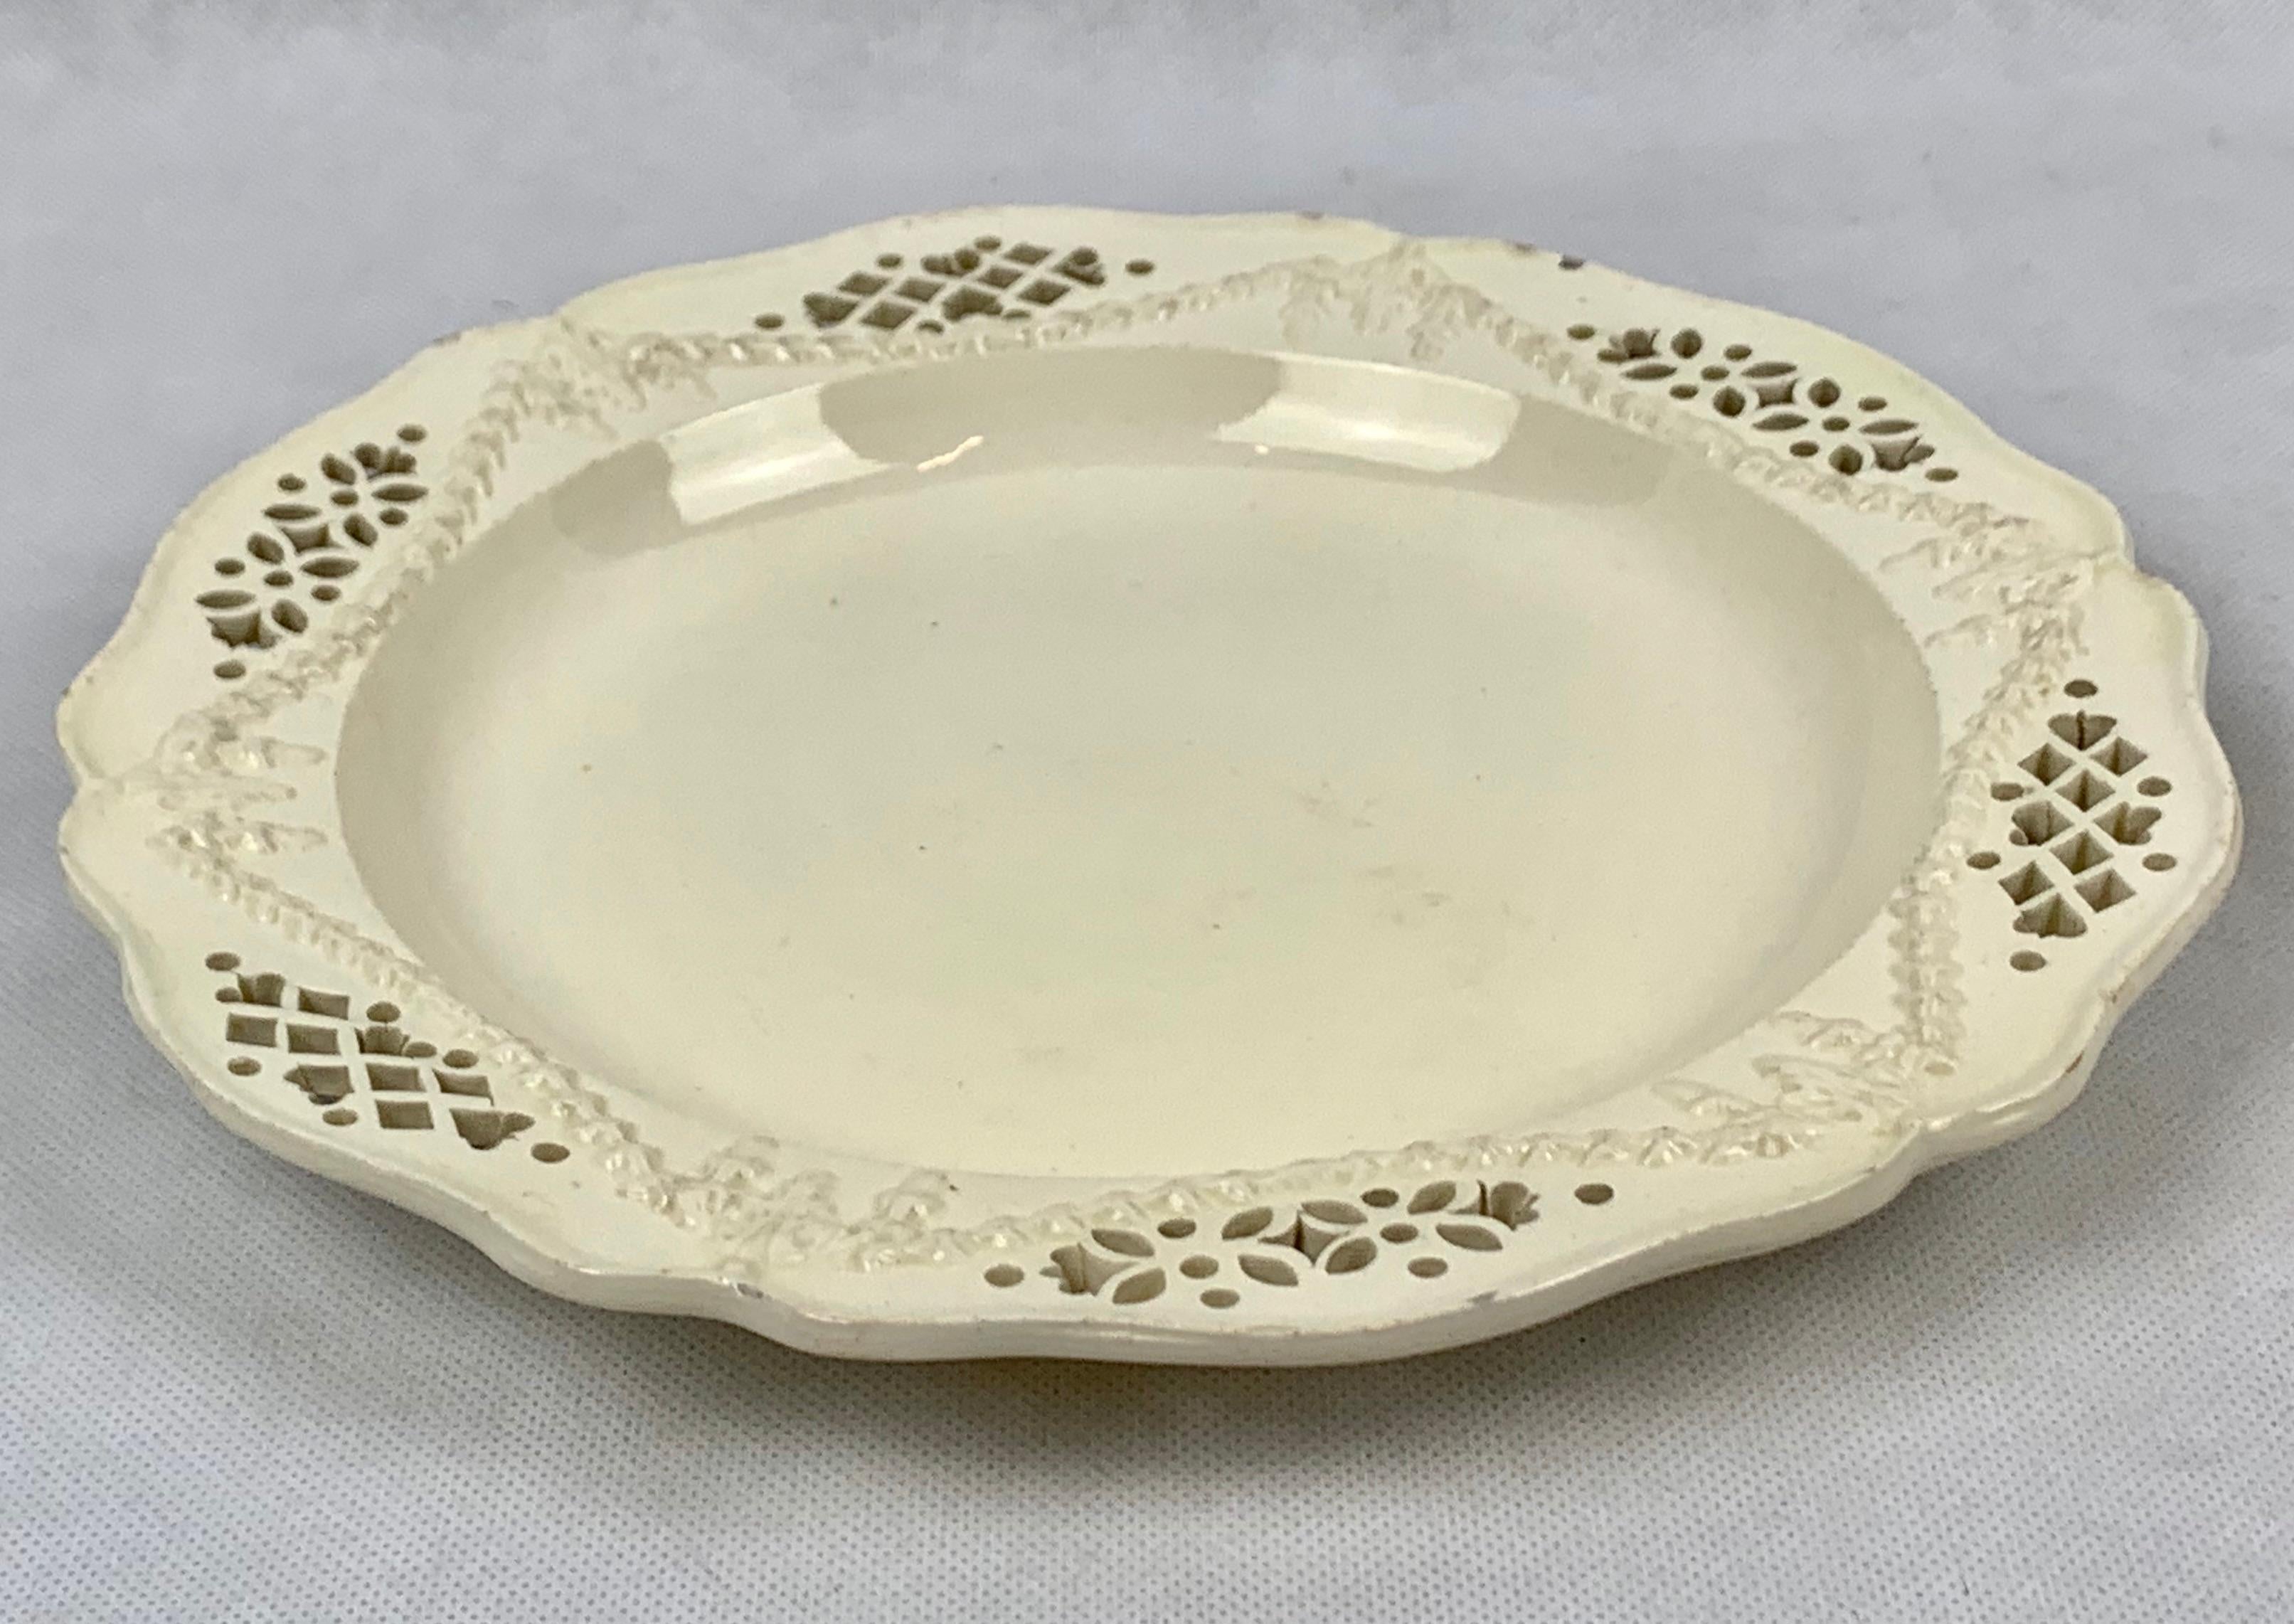 Late 18th century English creamware plate. The scalloped plate edge conforms to a reticulated border with swags of bell flowers. The center of the plate has a deep dished out form. There are tiny flakes at the plates edge which are not unusual for a